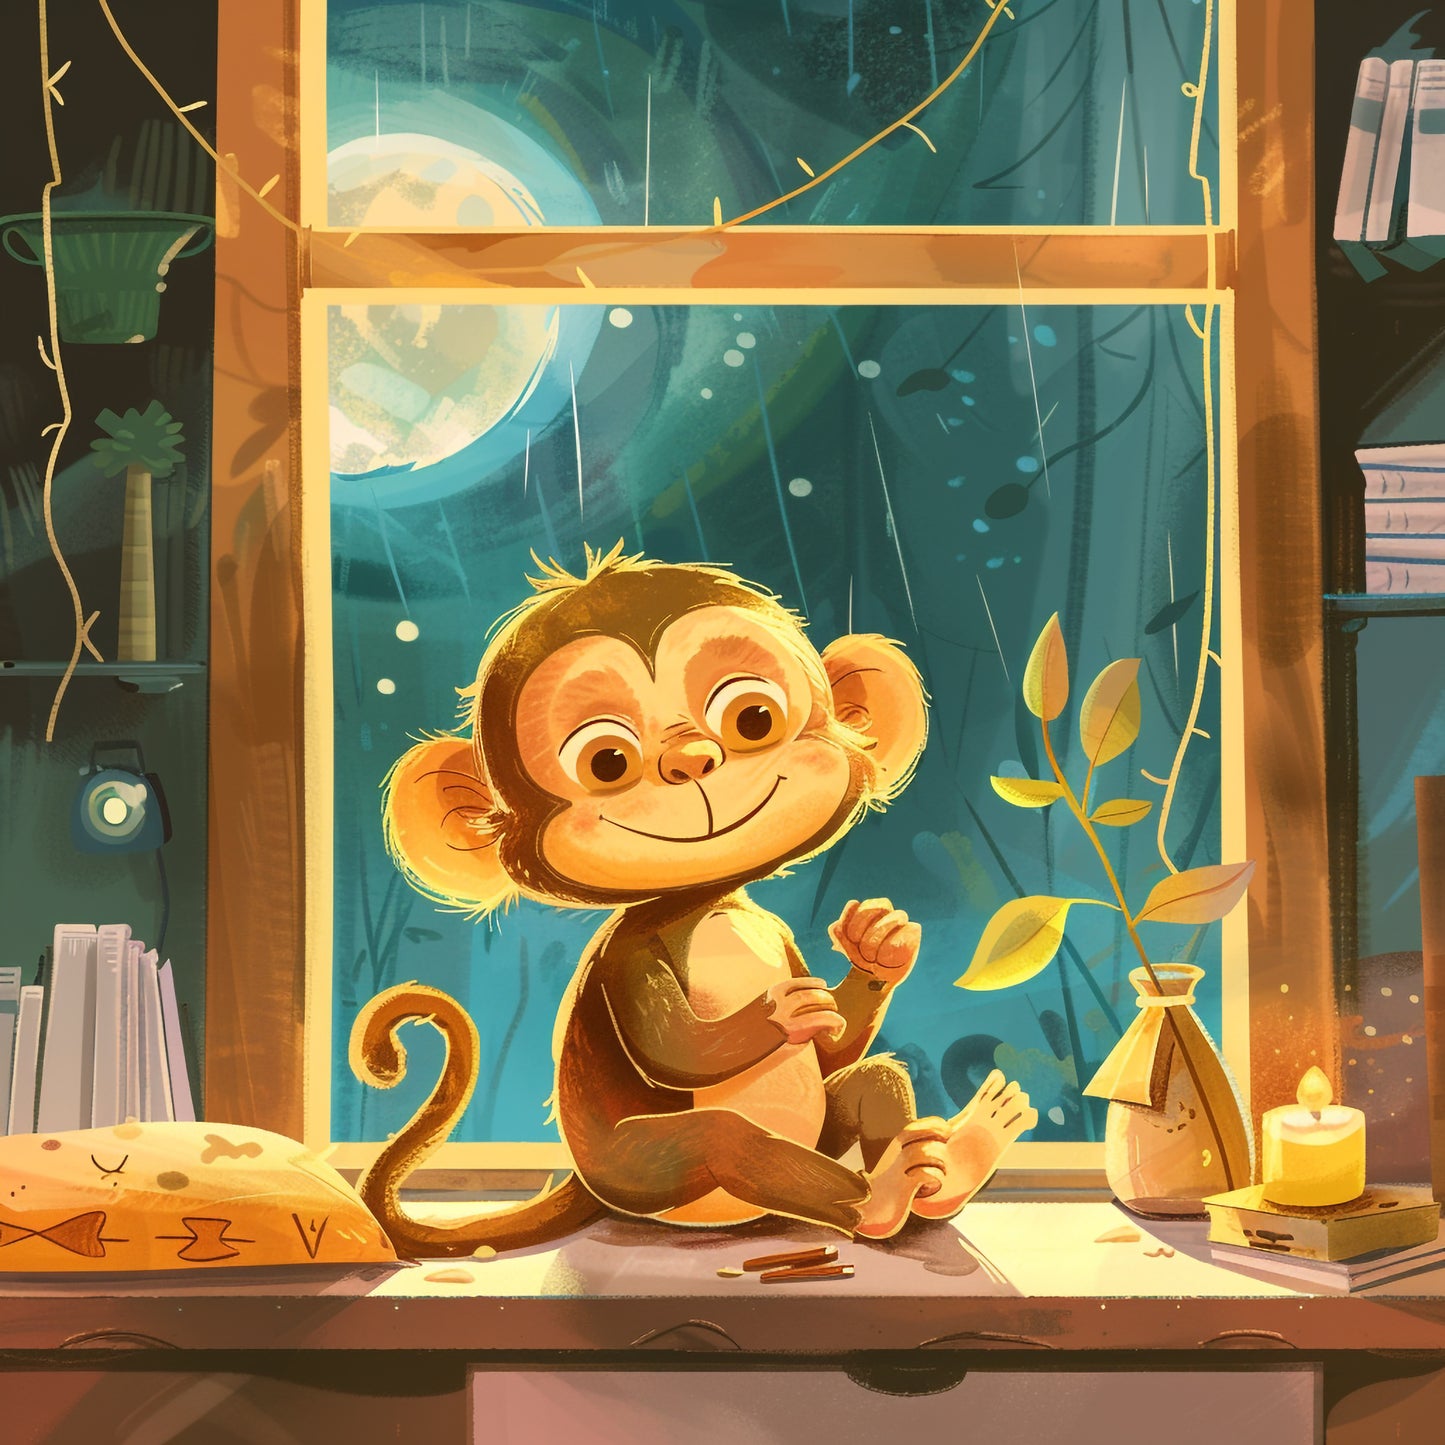 Adorable Baby Monkey Sitting Cozily in Bedroom at Night